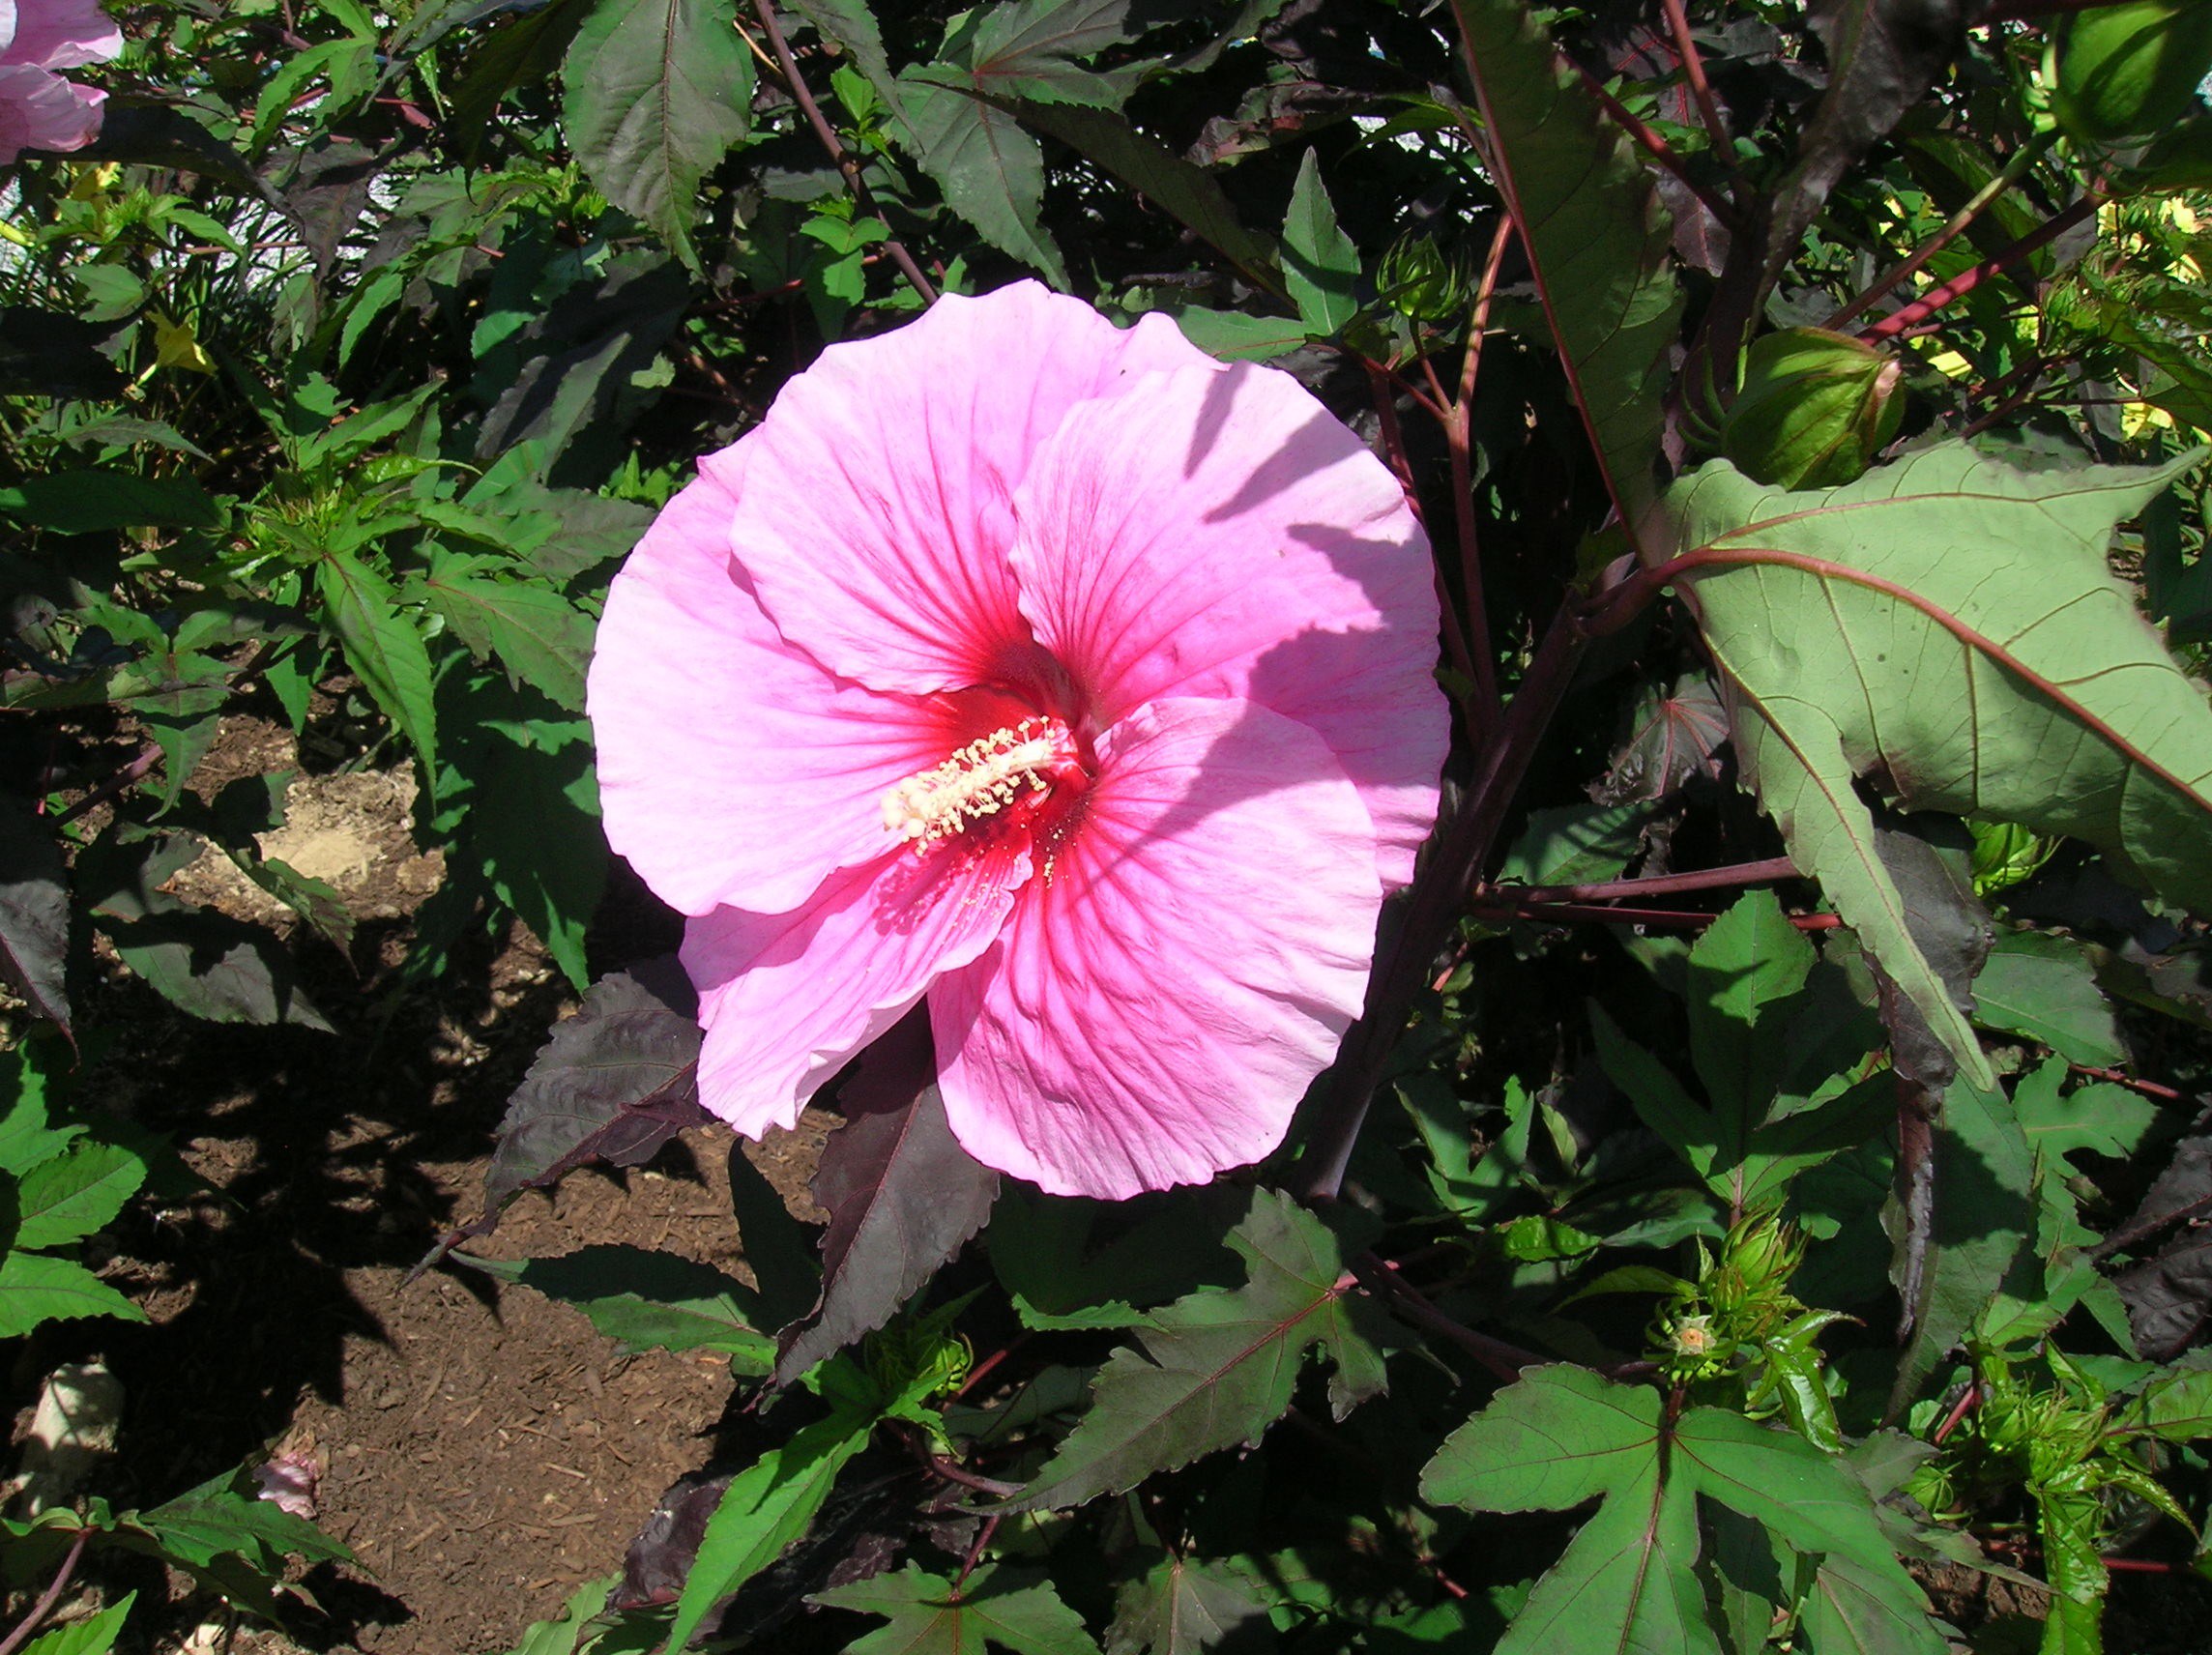 How to Grow: Hardy Hibiscus- Growing and Caring for Hardy Hibiscus